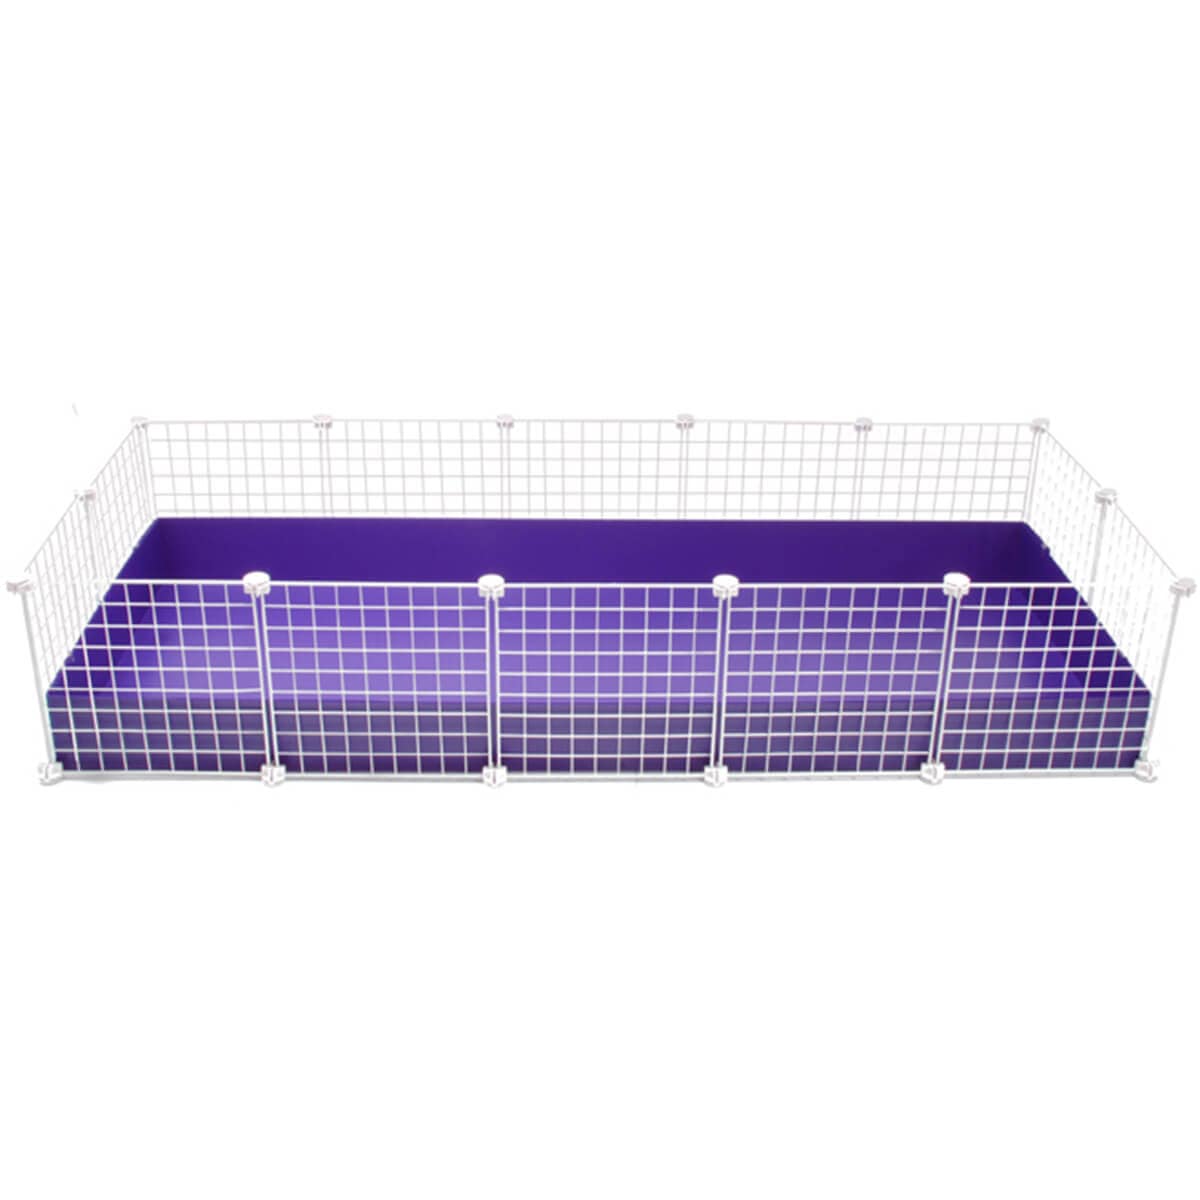 XL purple C&C guinea pig cage with white grids and connectors